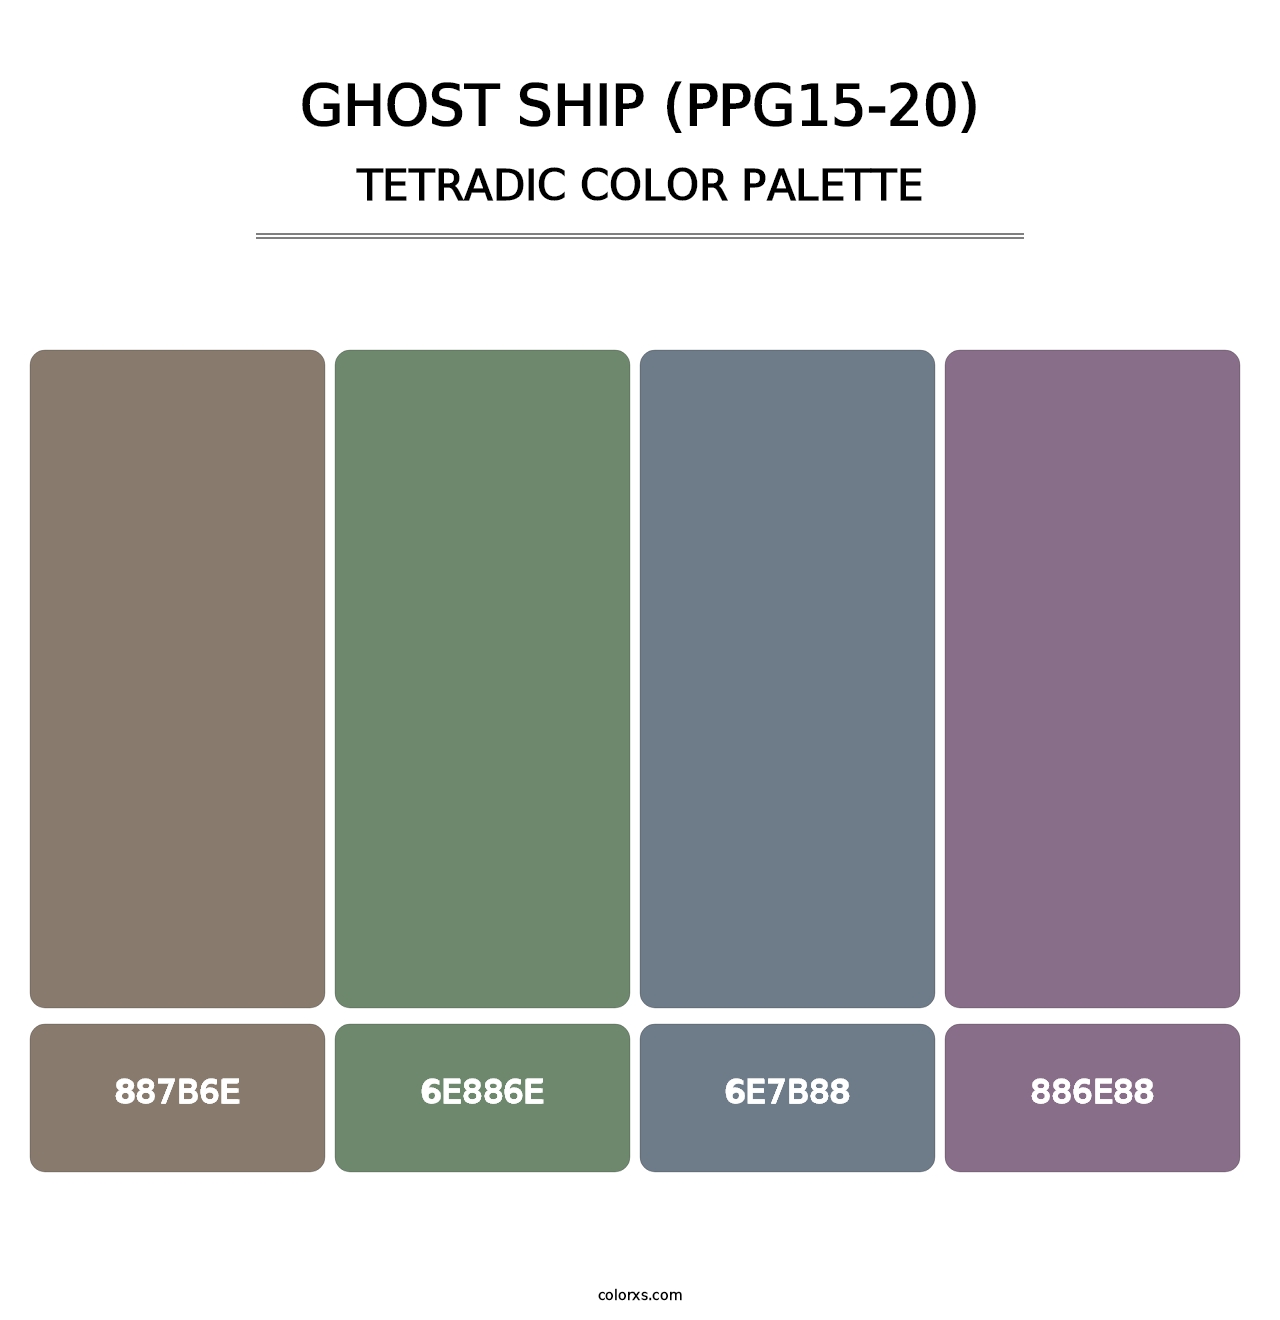 Ghost Ship (PPG15-20) - Tetradic Color Palette